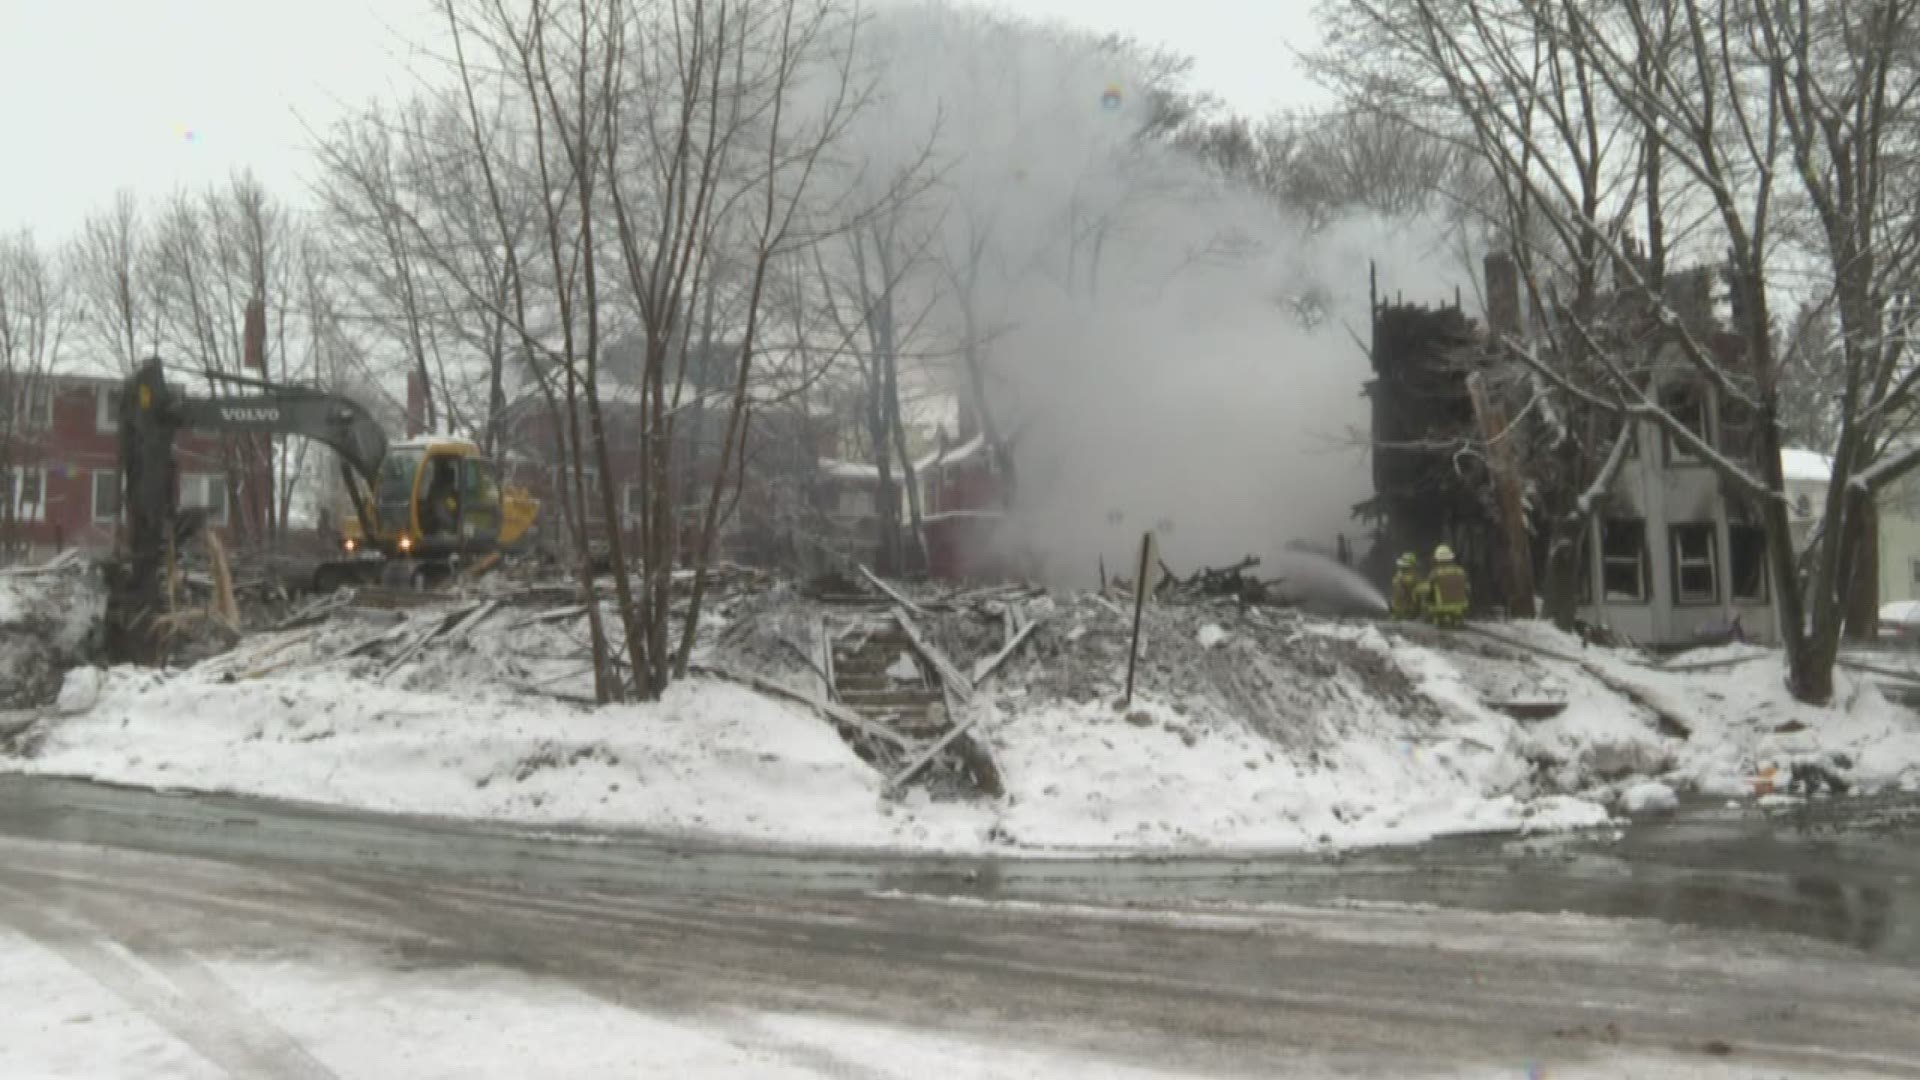 Fire officials still trying to determine what started Rumford fire